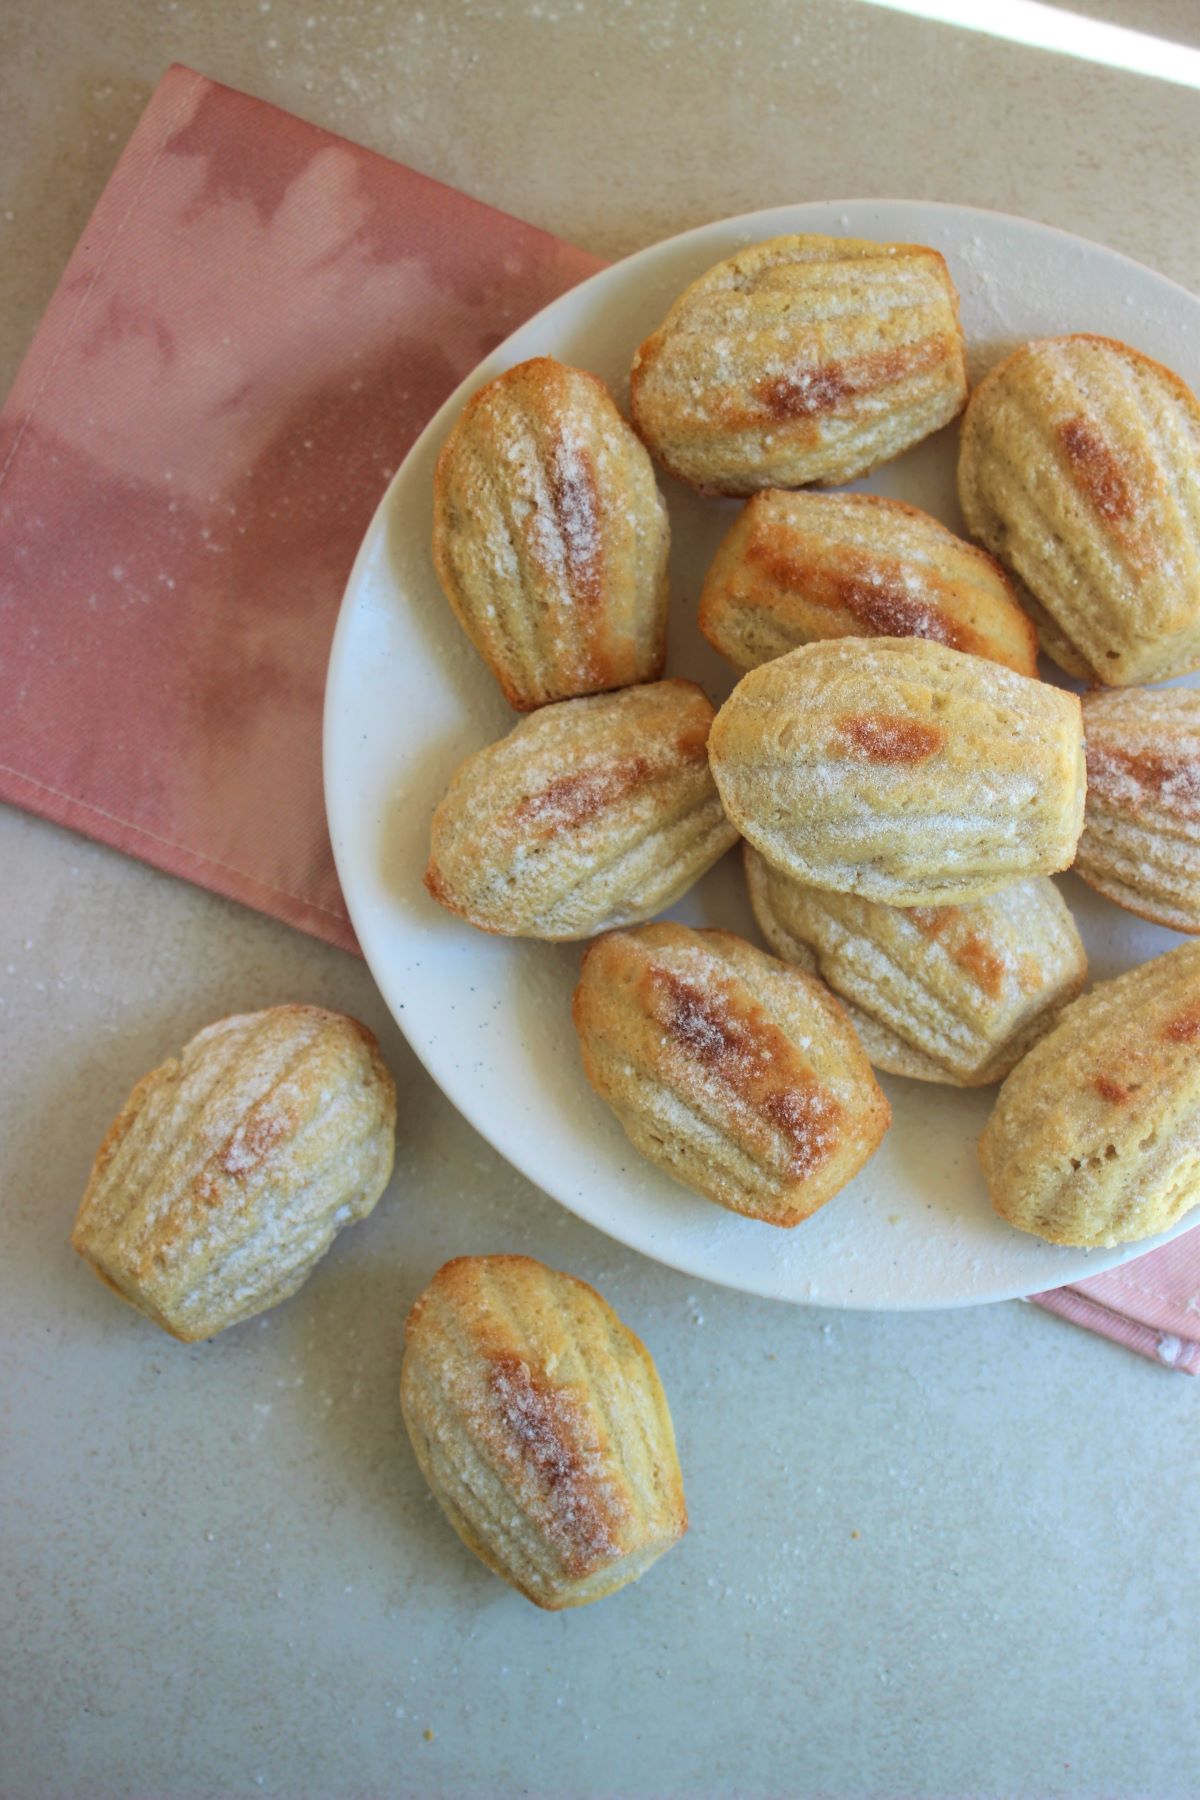 Many madeleines in a white plate, and two madeleines on the side seem from above.